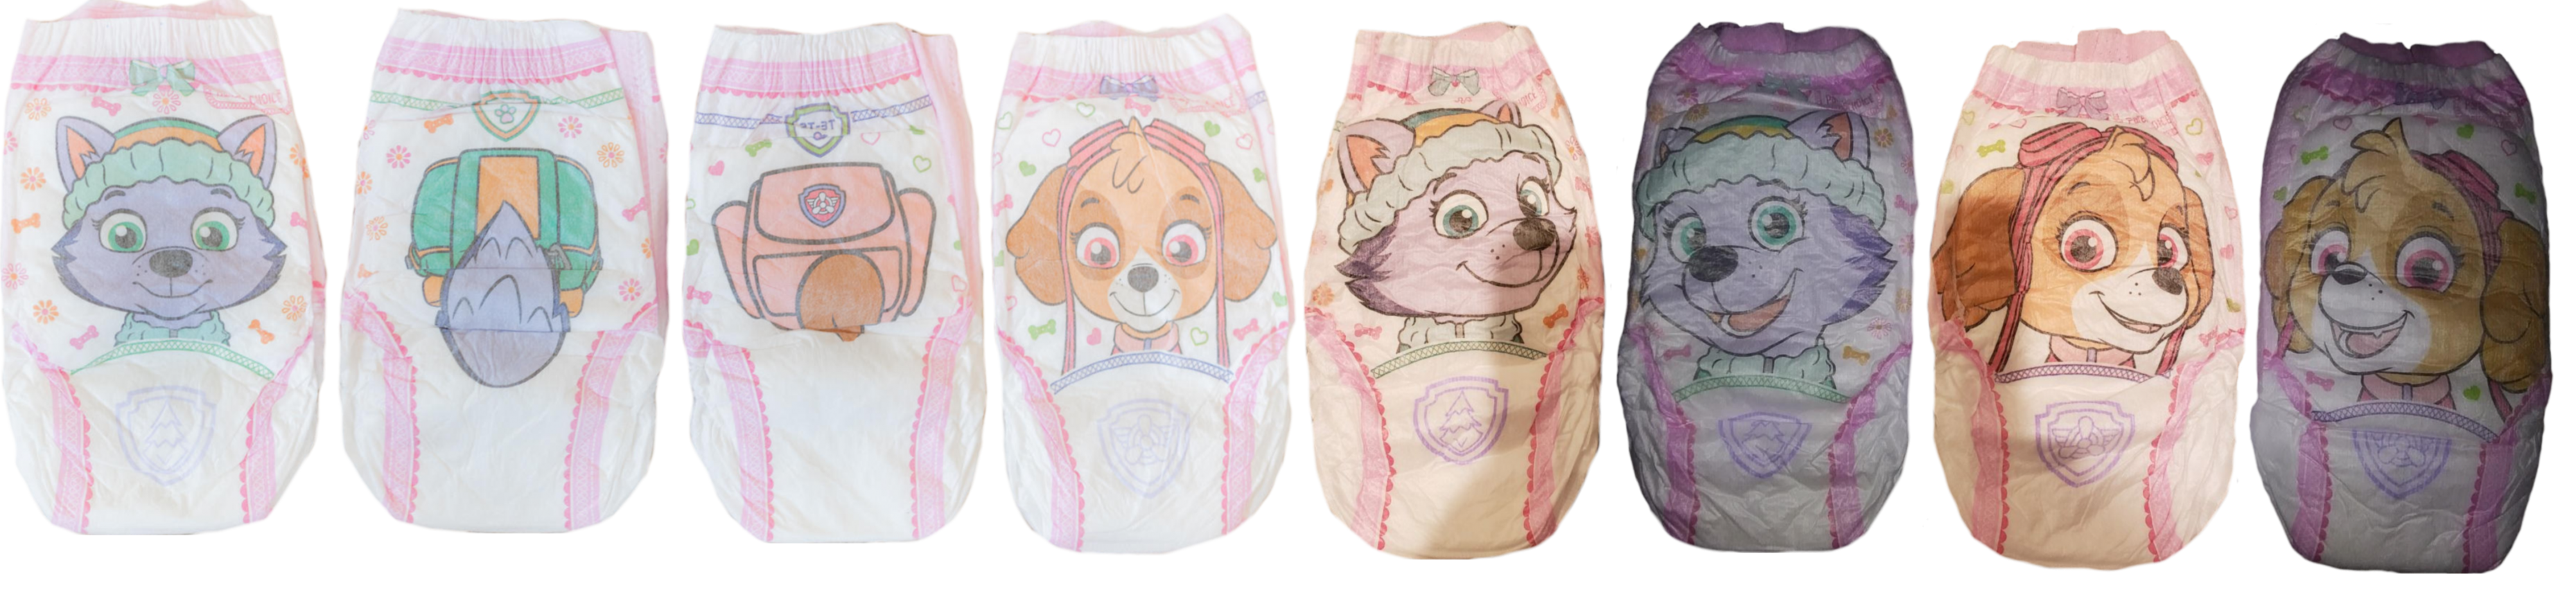 PAW Patrol training pants references (Girls) 2.0 by PlayStation2ND -- Fur  Affinity [dot] net